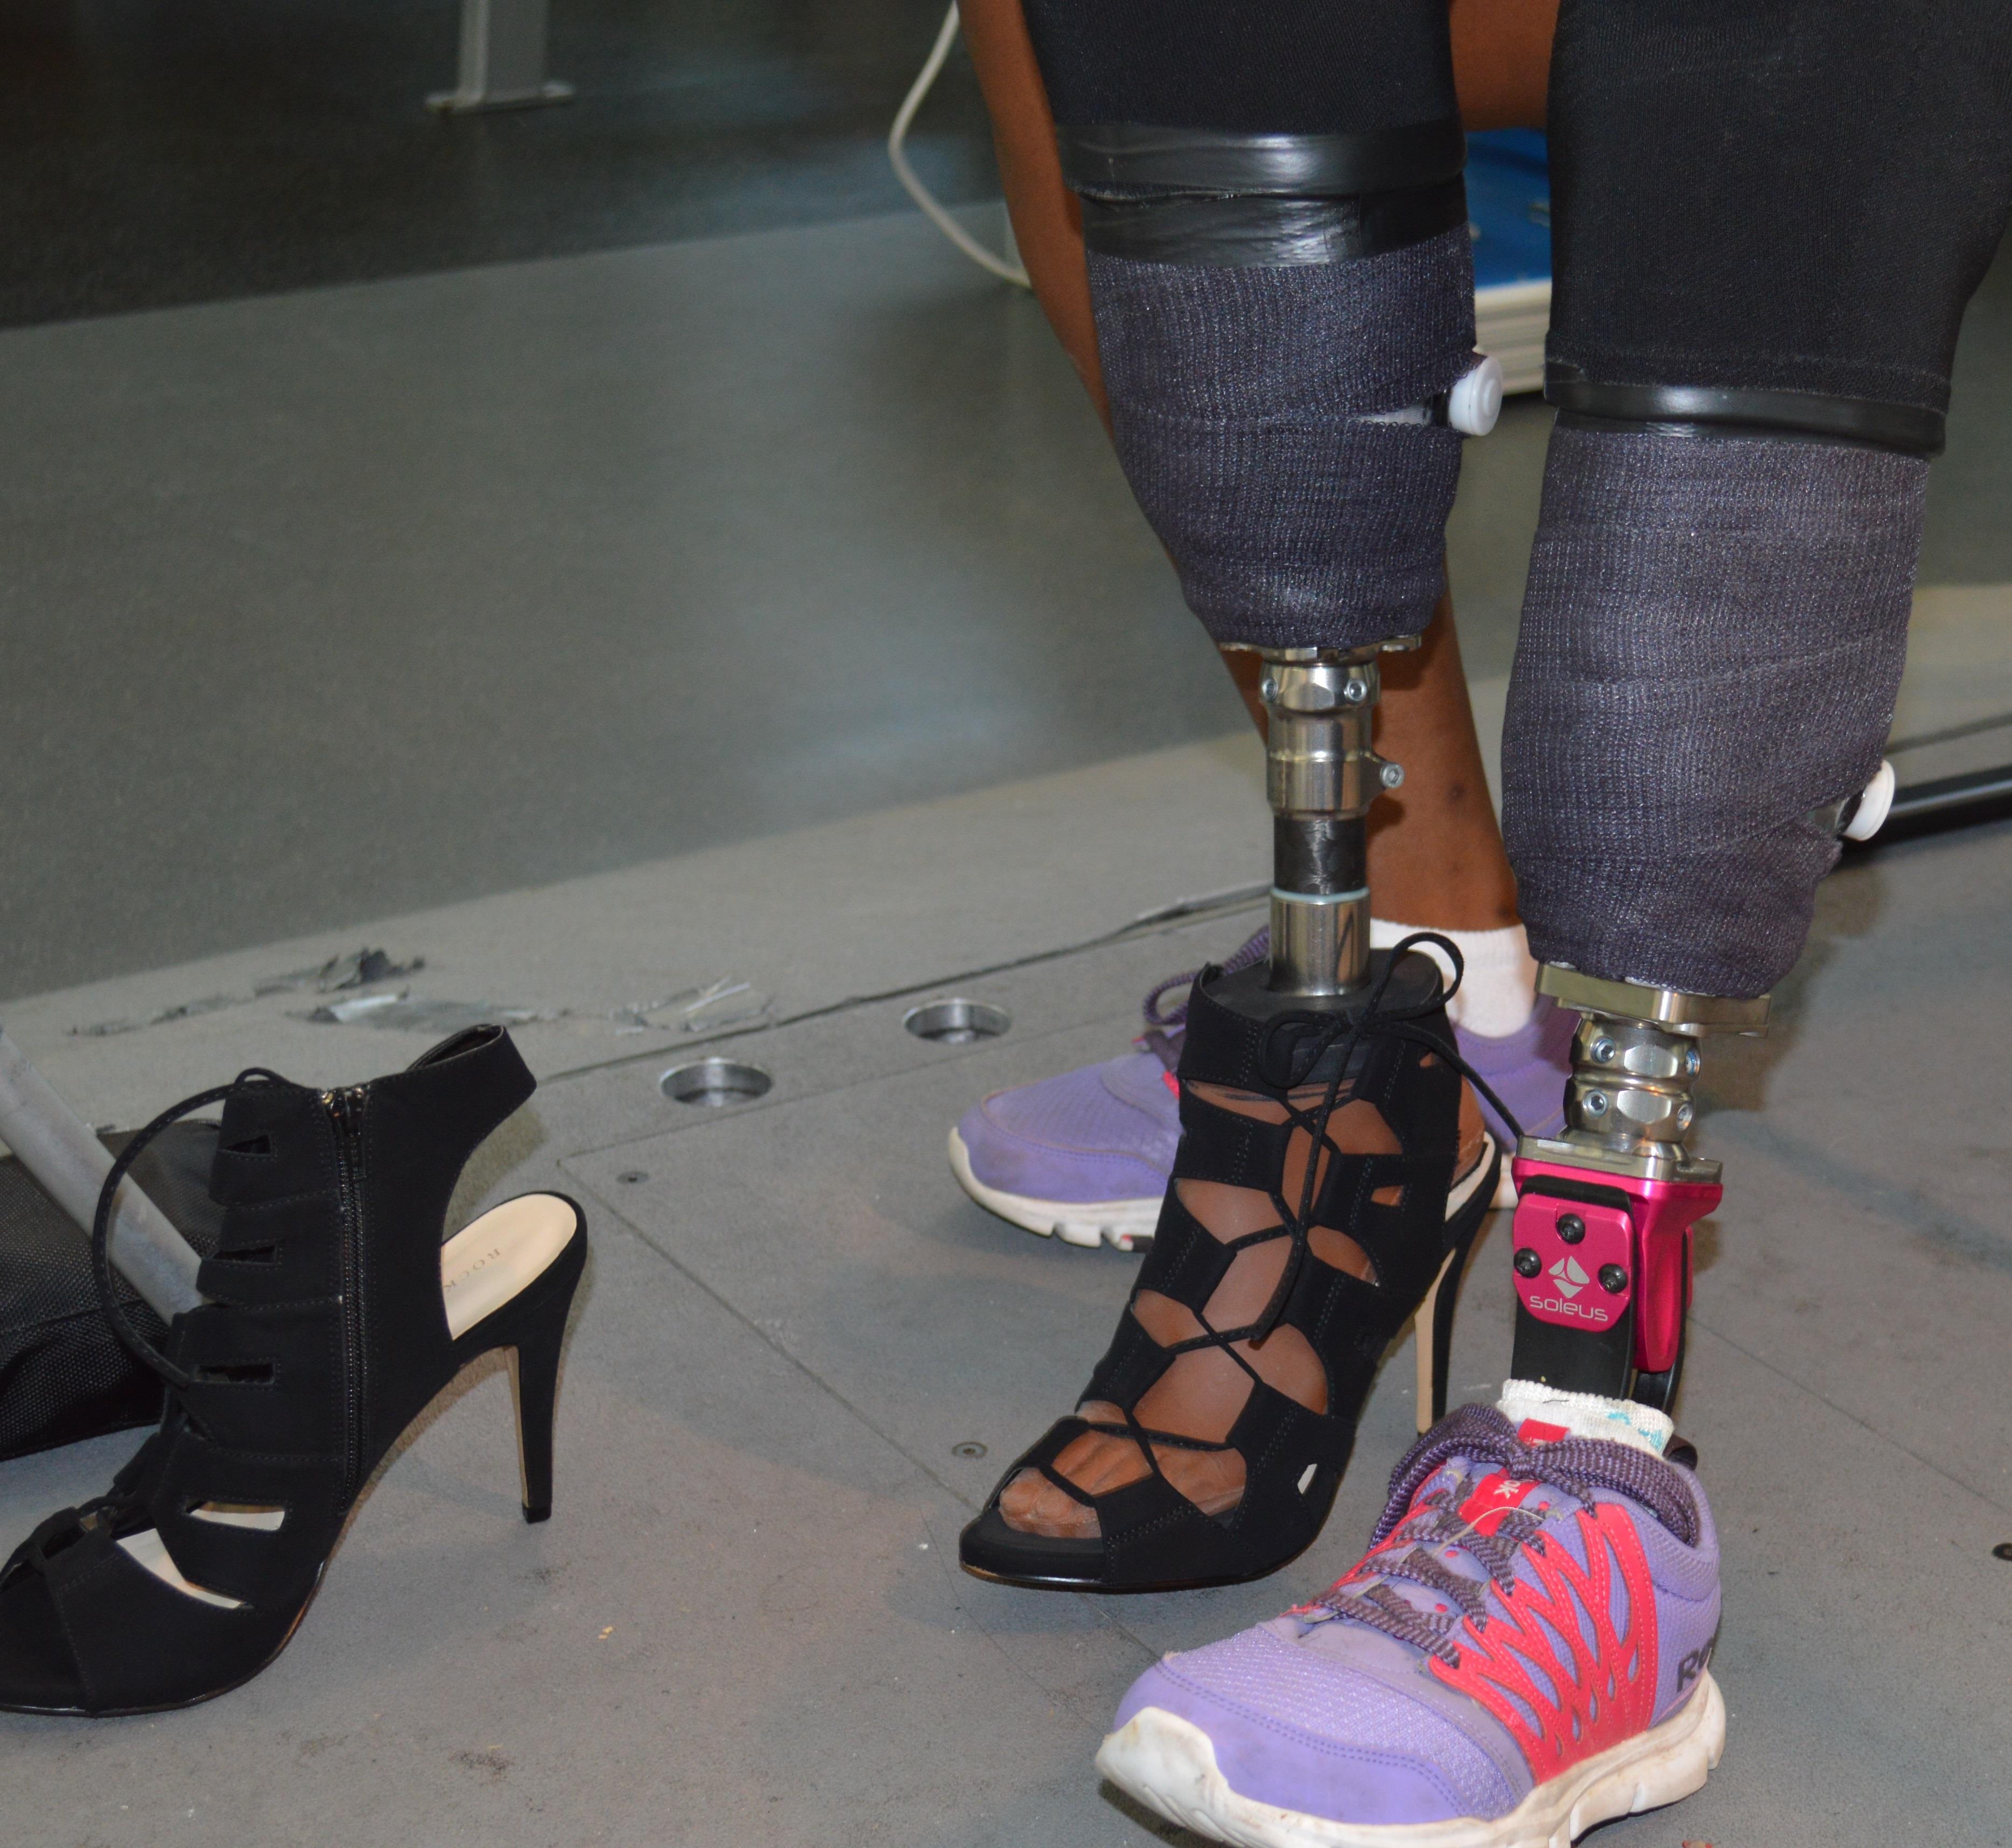 Women face unique challenges when getting a prosthesis > Joint